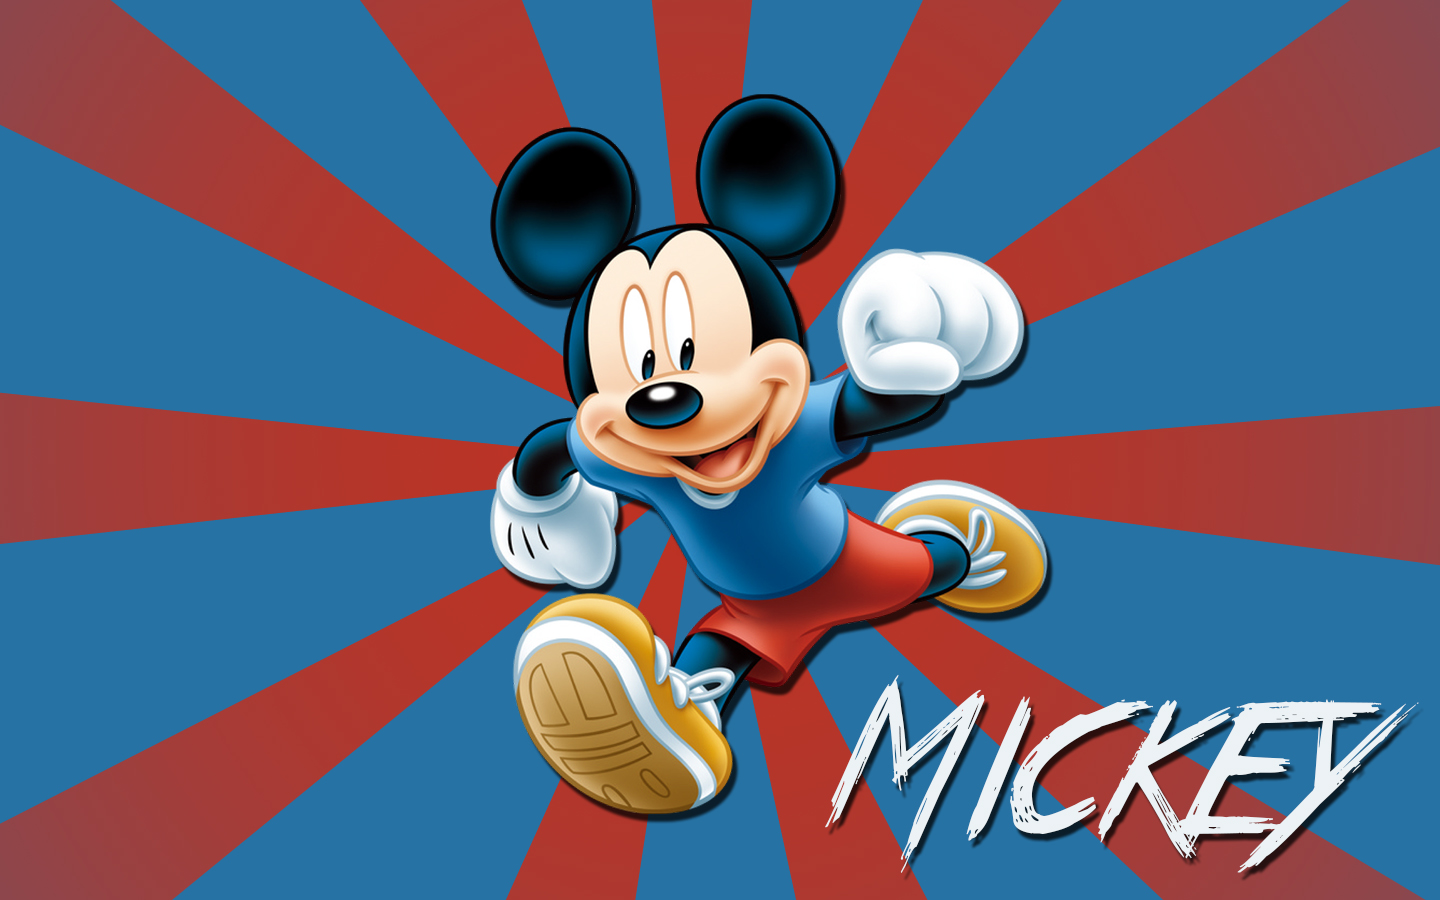 Free Download Mickey Mouse Computer Wallpapers Mickey And Friends Photo 1440x900 For Your Desktop Mobile Tablet Explore 24 Mickey Mouse Pc Wallpapers Mickey Mouse Background Mickey Mouse Wallpaper Mickey Mouse Backgrounds